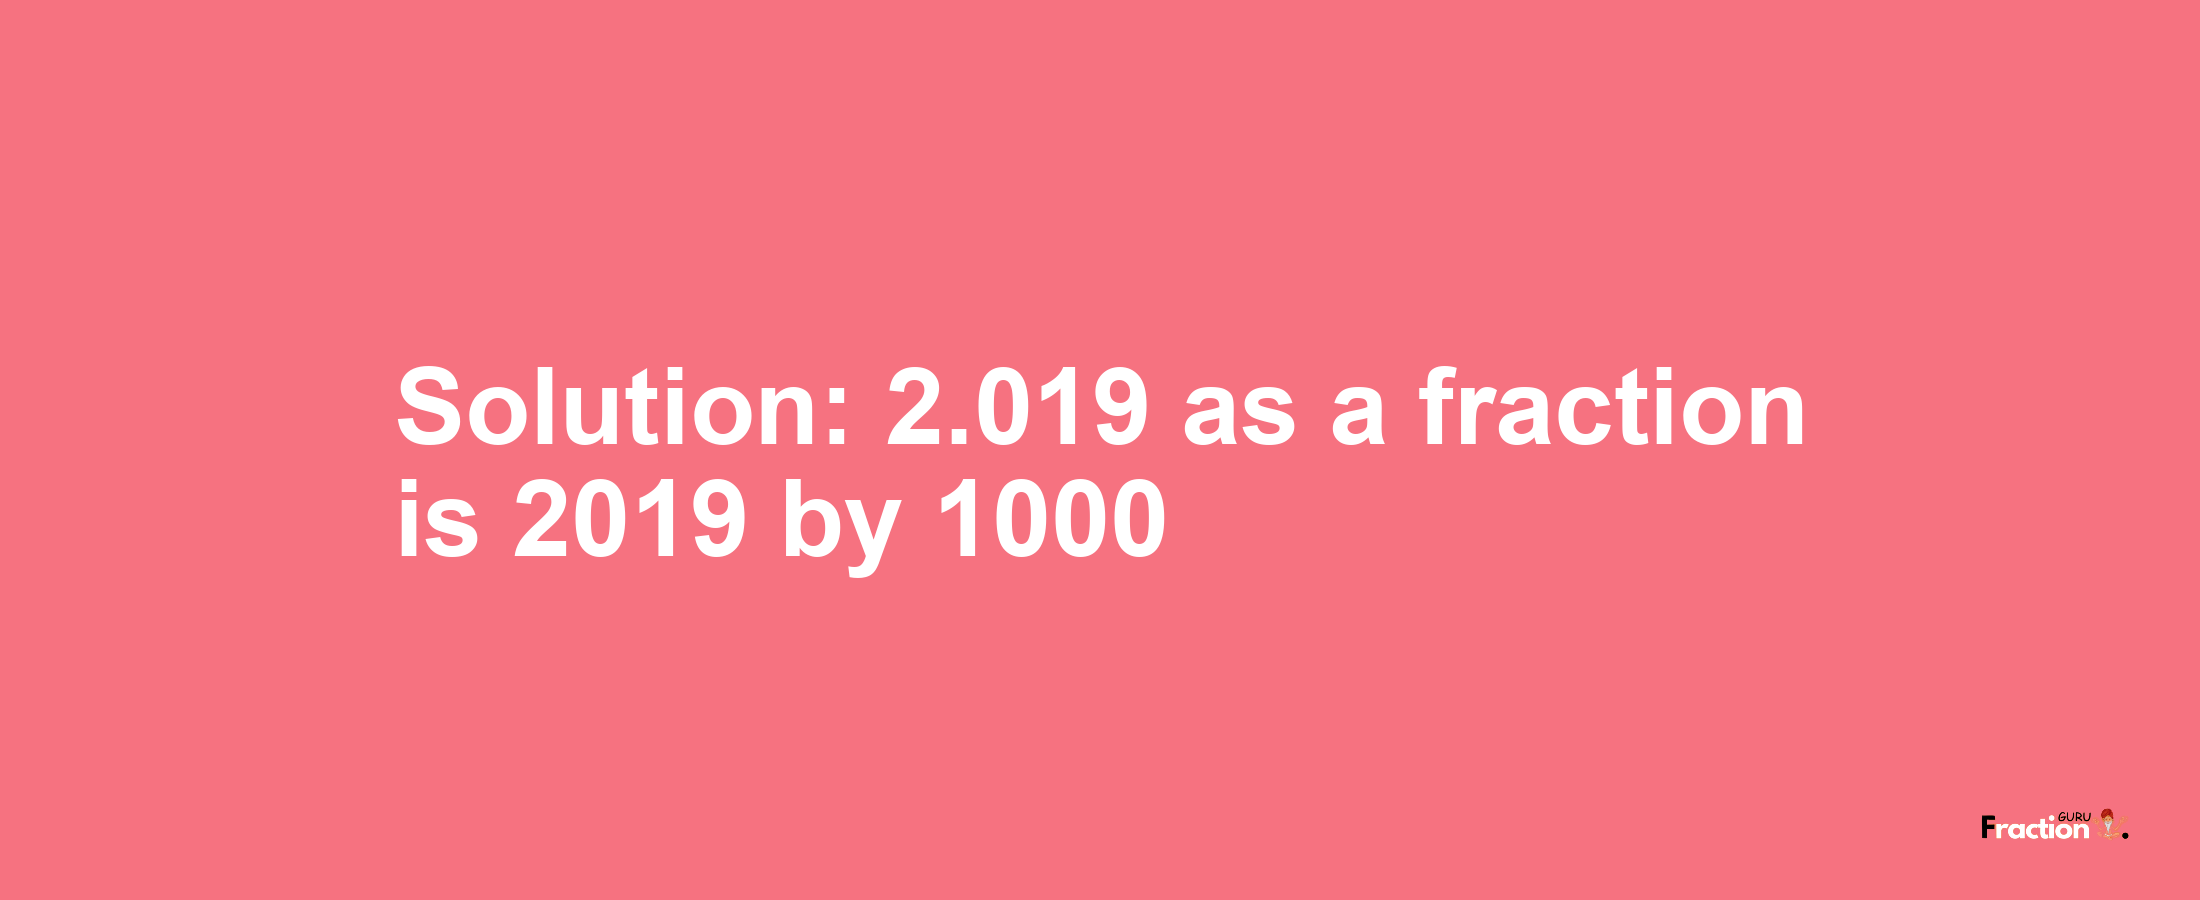 Solution:2.019 as a fraction is 2019/1000